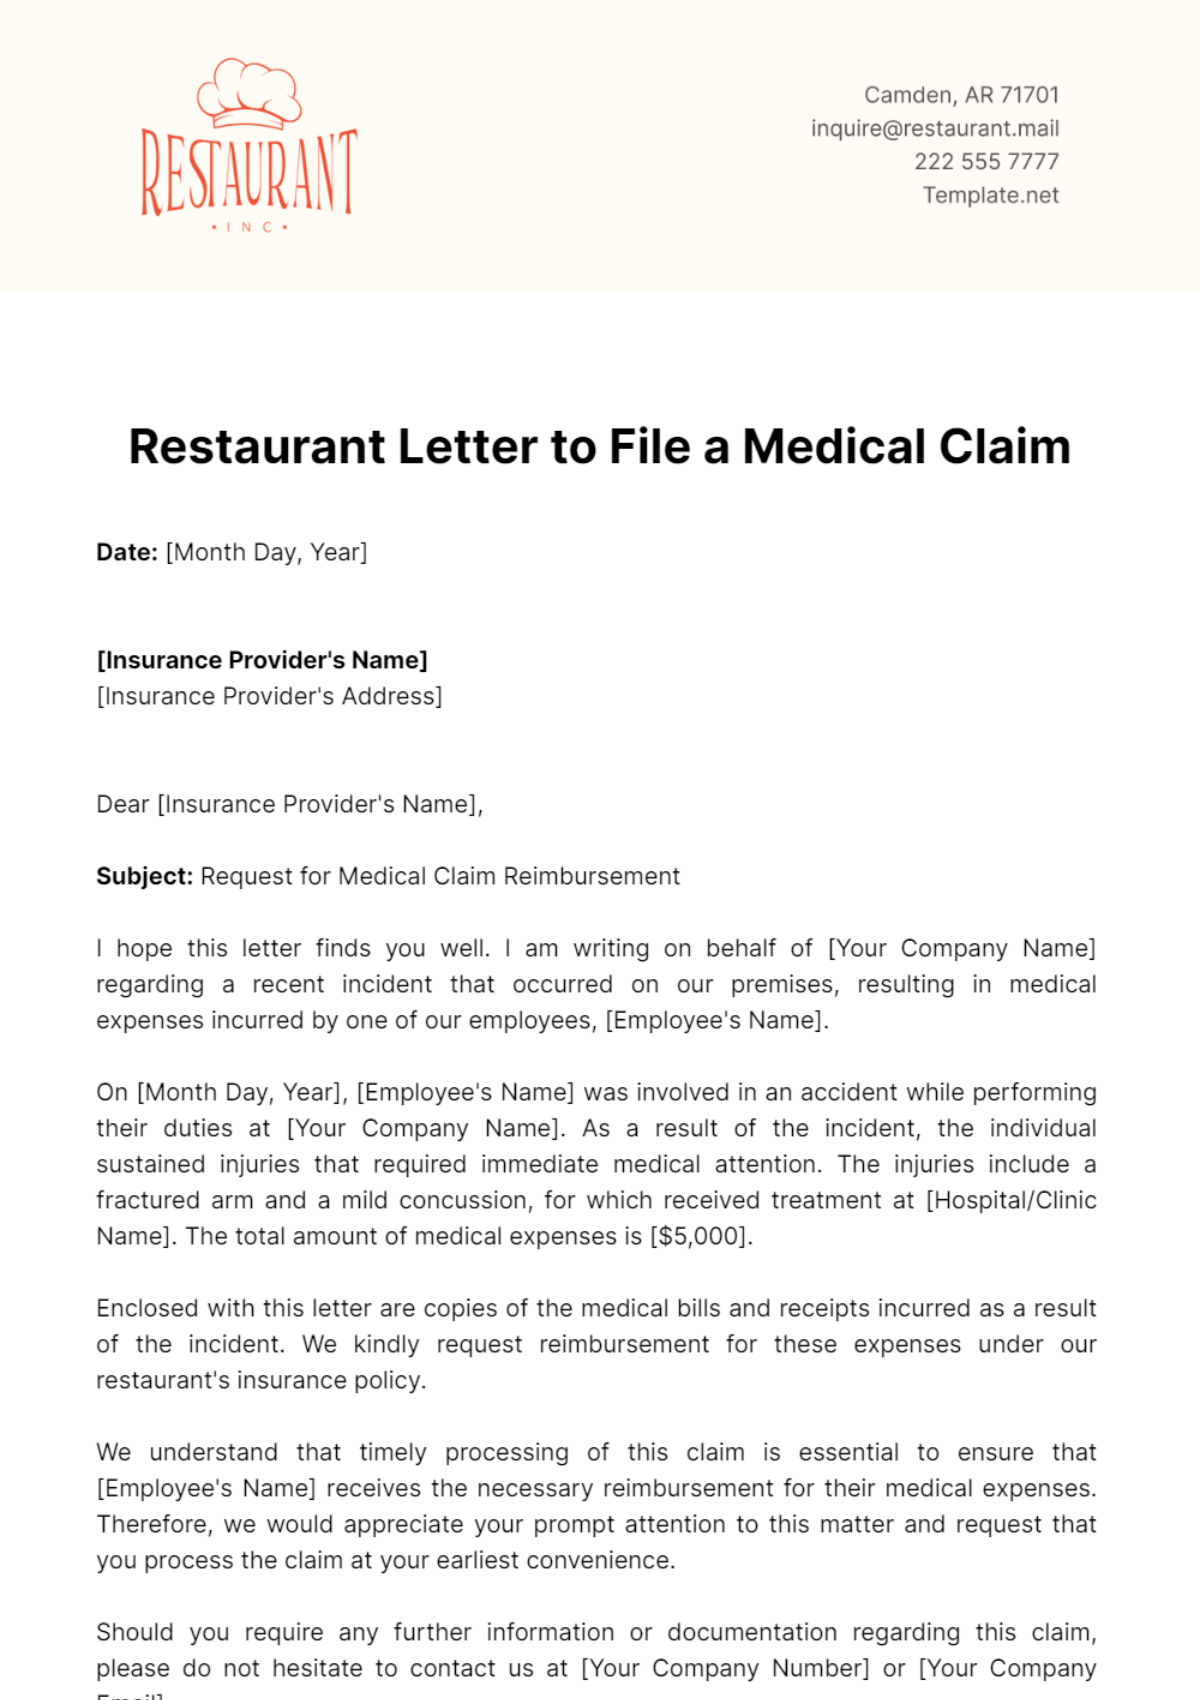 Free Restaurant Letter to File a Medical Claim Template